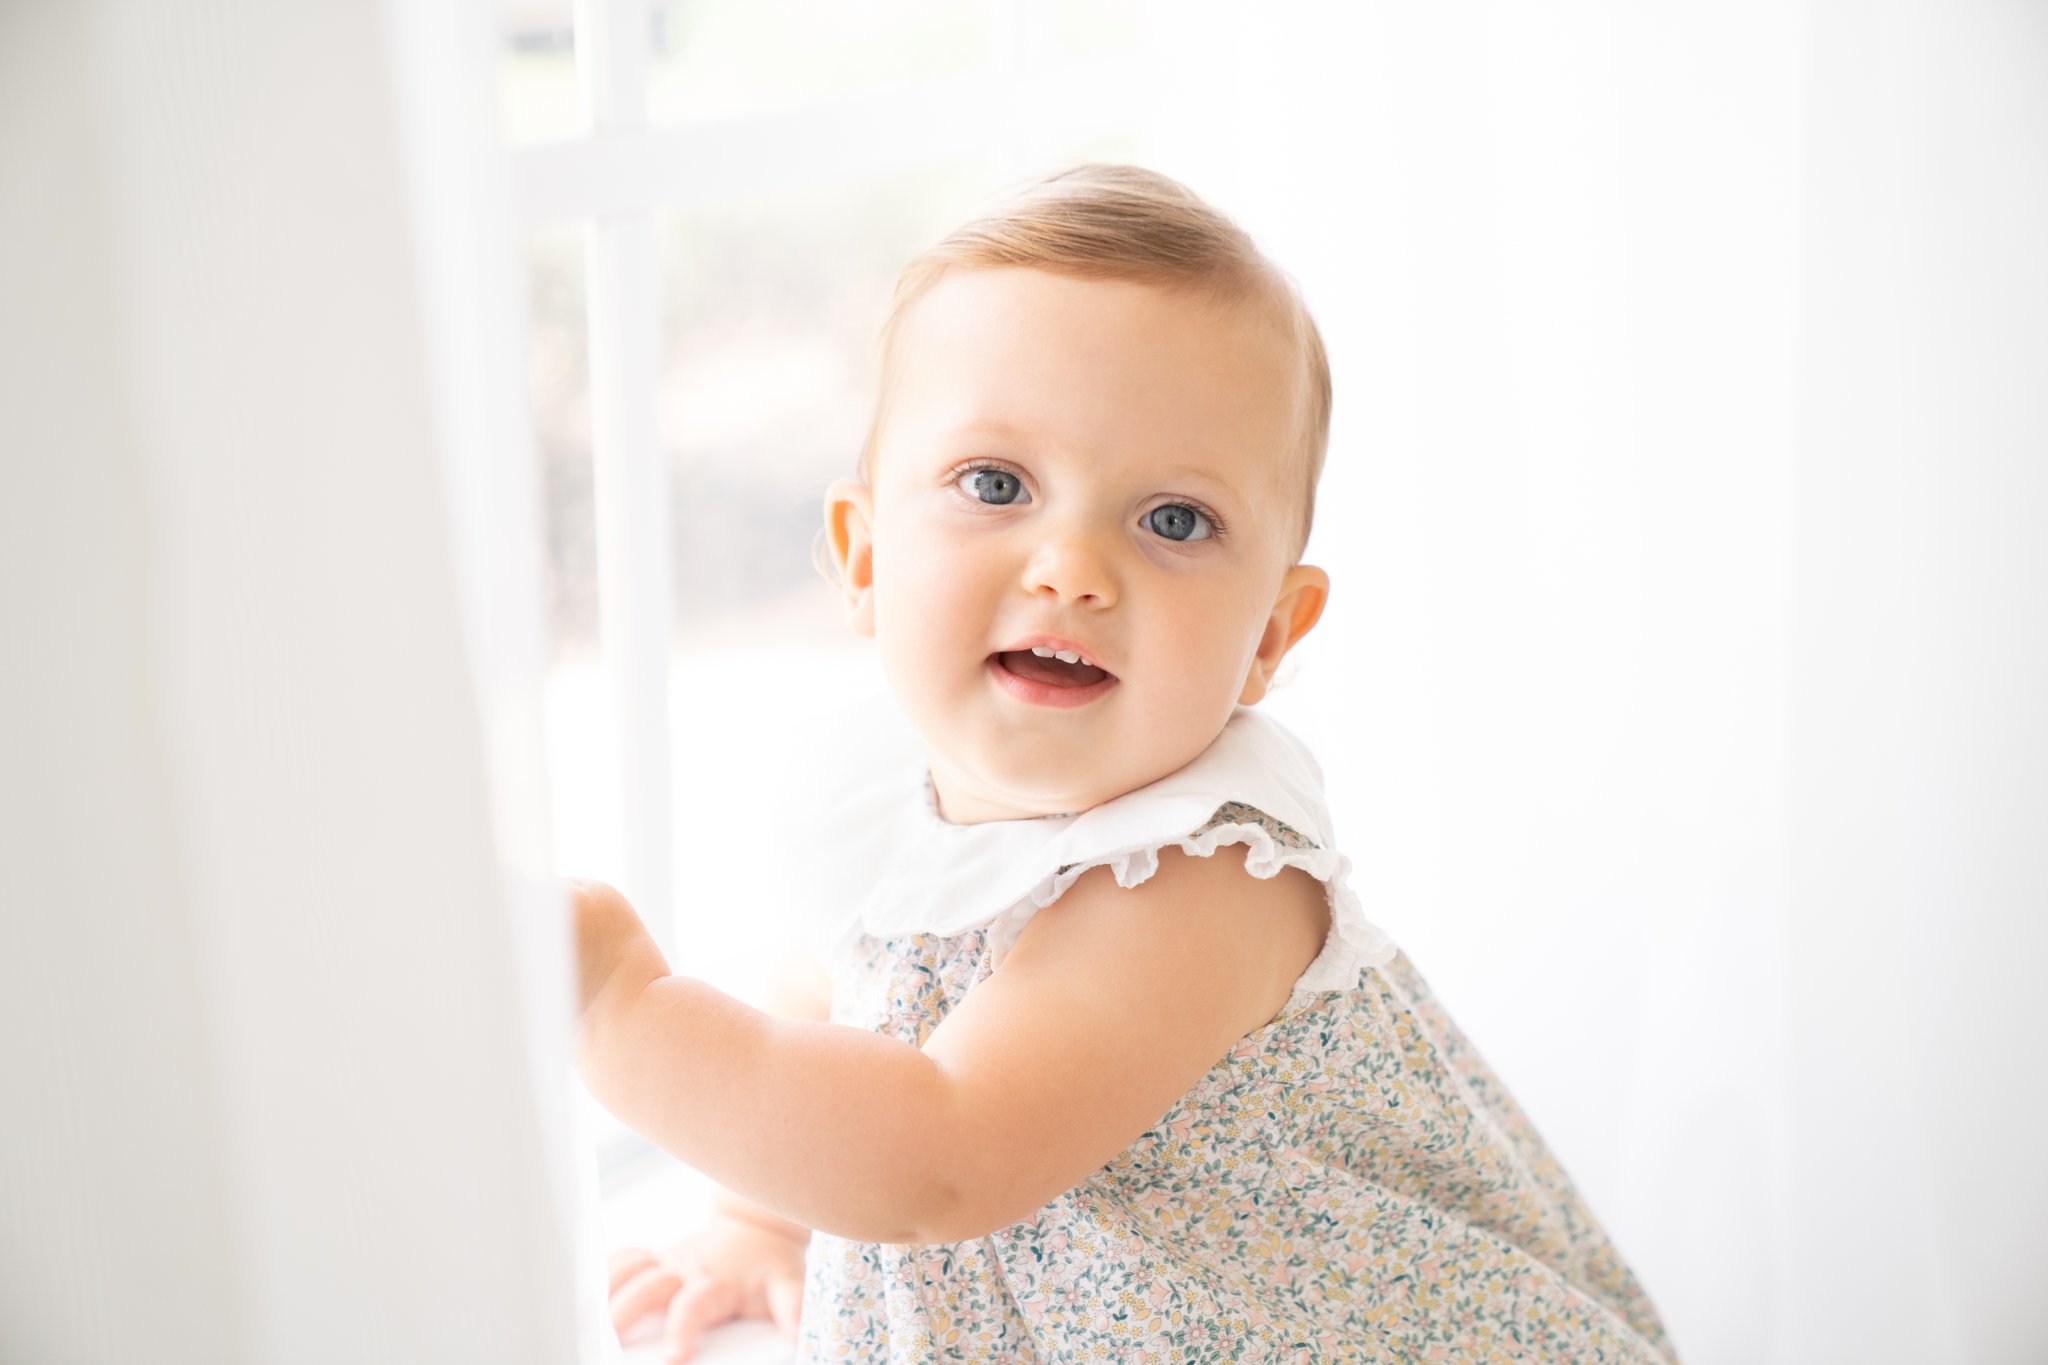 One Year old Baby girl's birthday photography ssession in Jupiter Fl studio